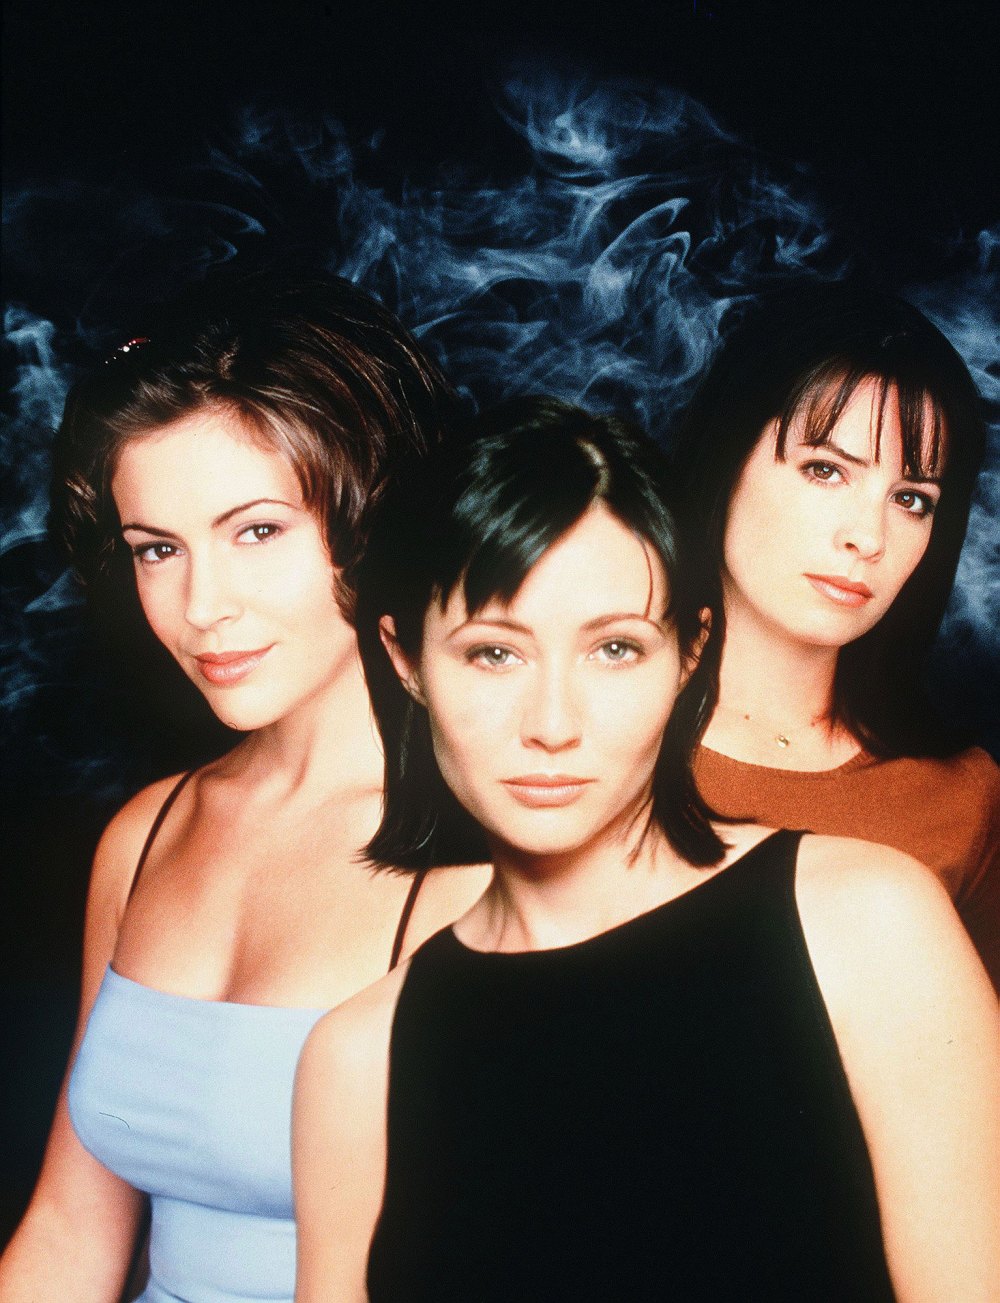 Alyssa Milano: Working With Shannen Doherty, Holly Marie Combs on Charmed Was “Like High School”